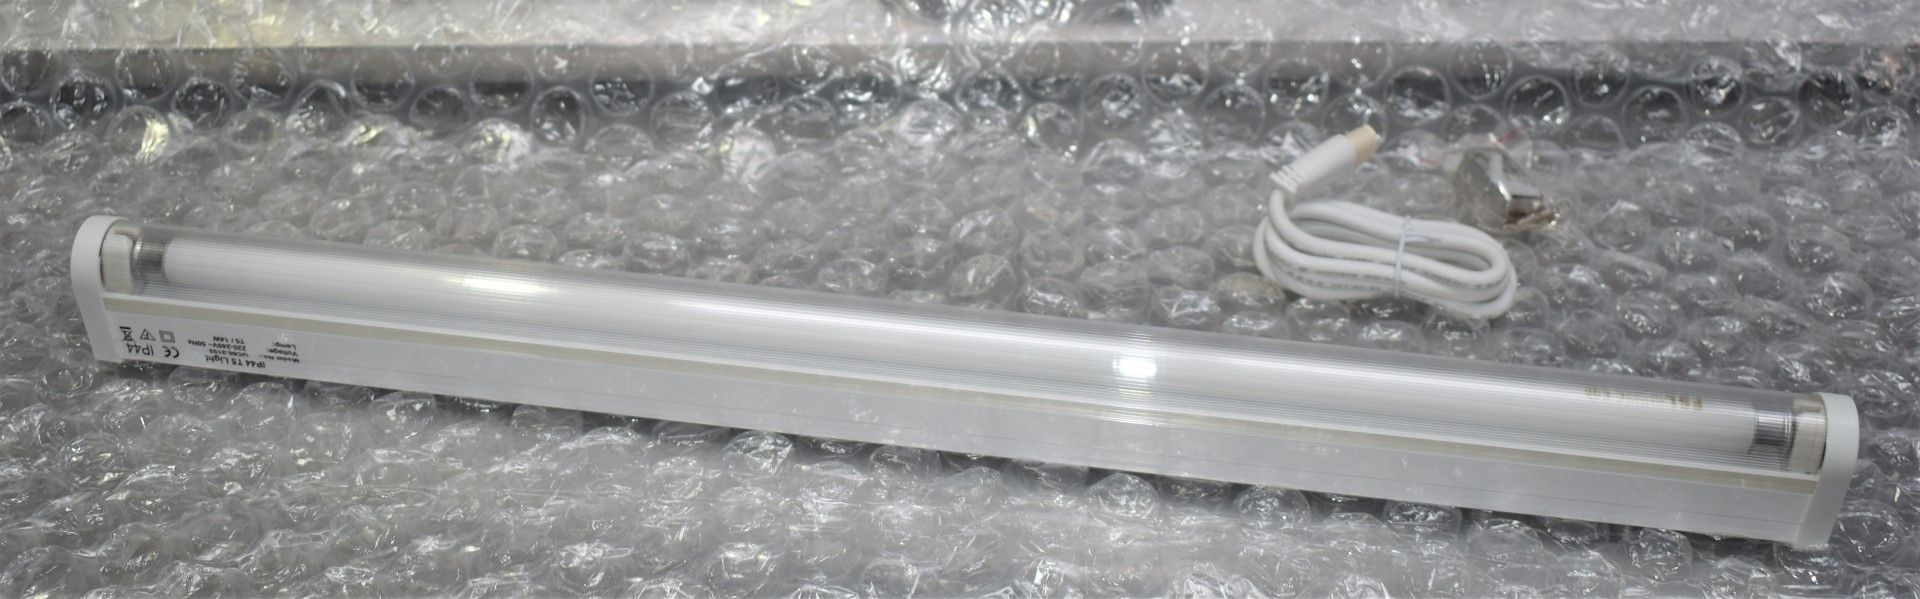 1 x Bathroom Light Fitting - IP44 Waterproof T5 14w Fluorescent Lights With Built-In Electronic